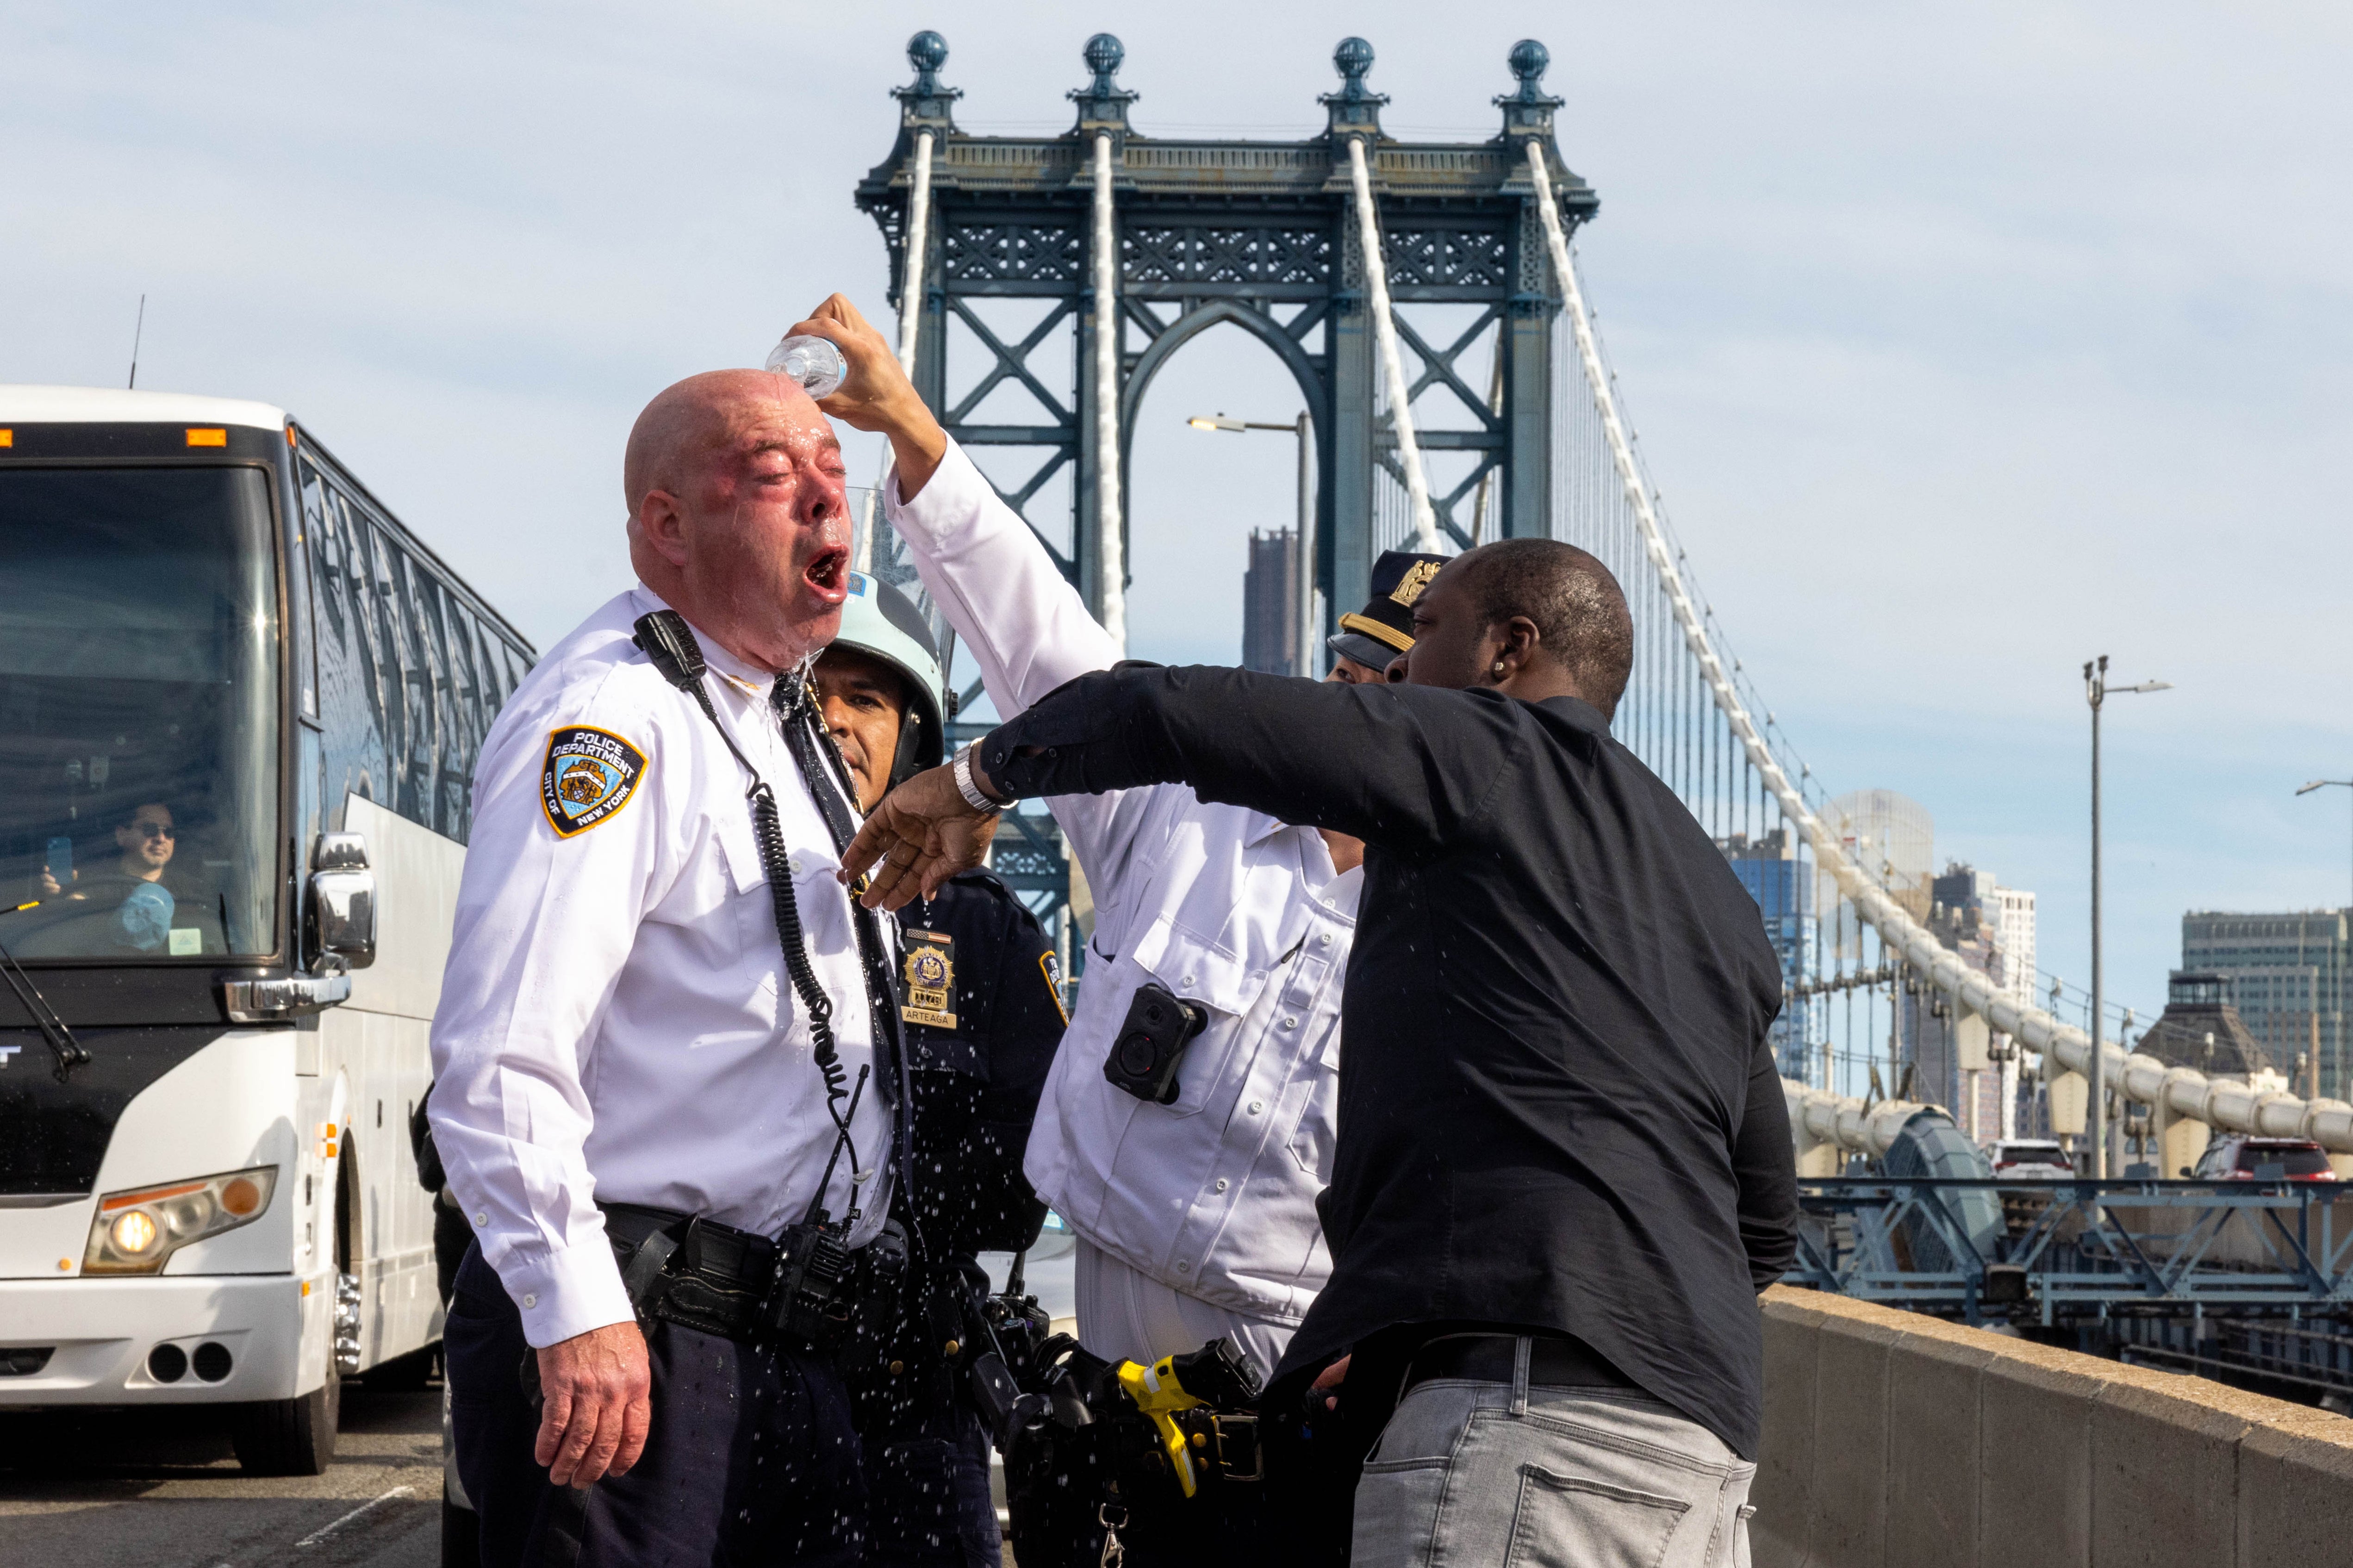 James McCarthy, NYPD assistant chief, is assisted after seemingly being affected by a chemical irritant as police arrest pro-Palestinian demonstrators blocking traffic on the Manhattan Bridge